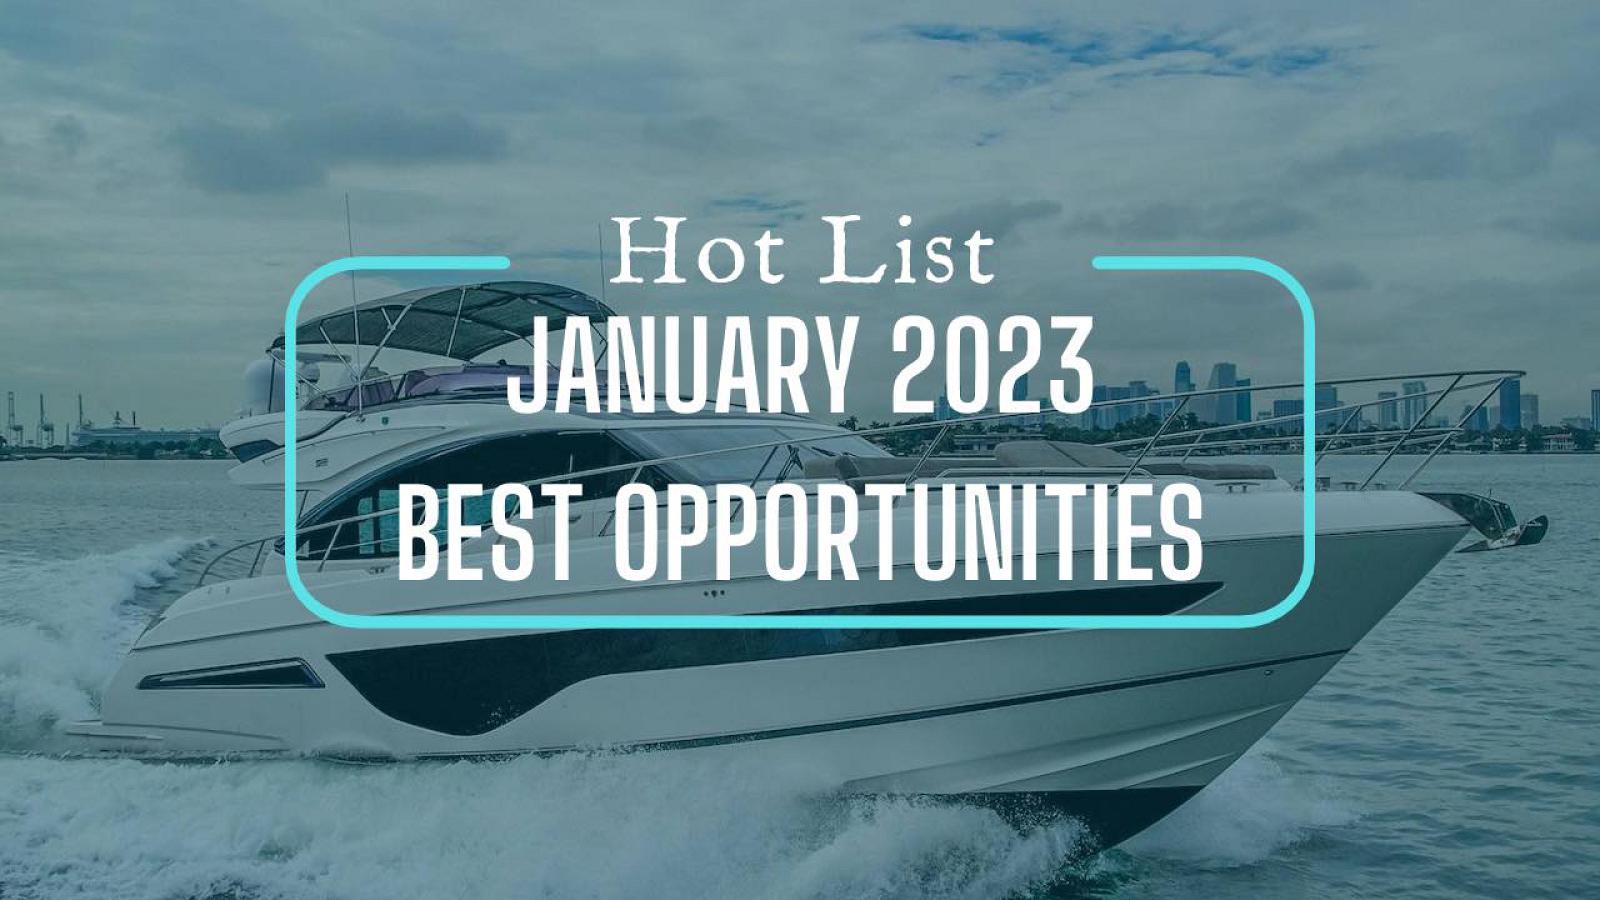 photo of The Hot List - January 2023